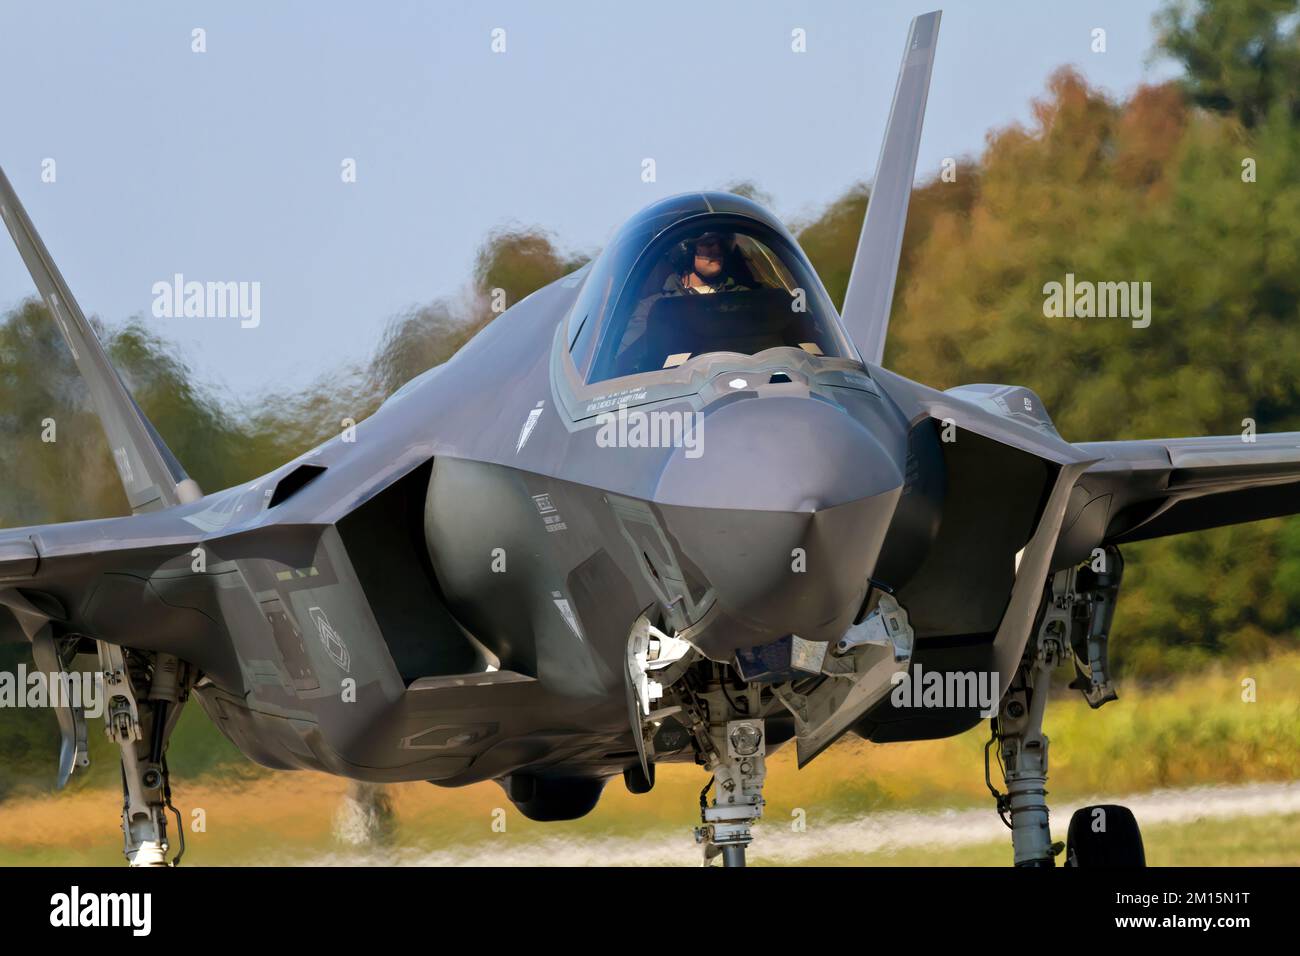 A Lockheed Martin F-35C Lightning II US Navy `Grim Reapers` jet fighter from Eglin Air Force Base, Florida, USA at 2017 Airshow London. Stock Photo